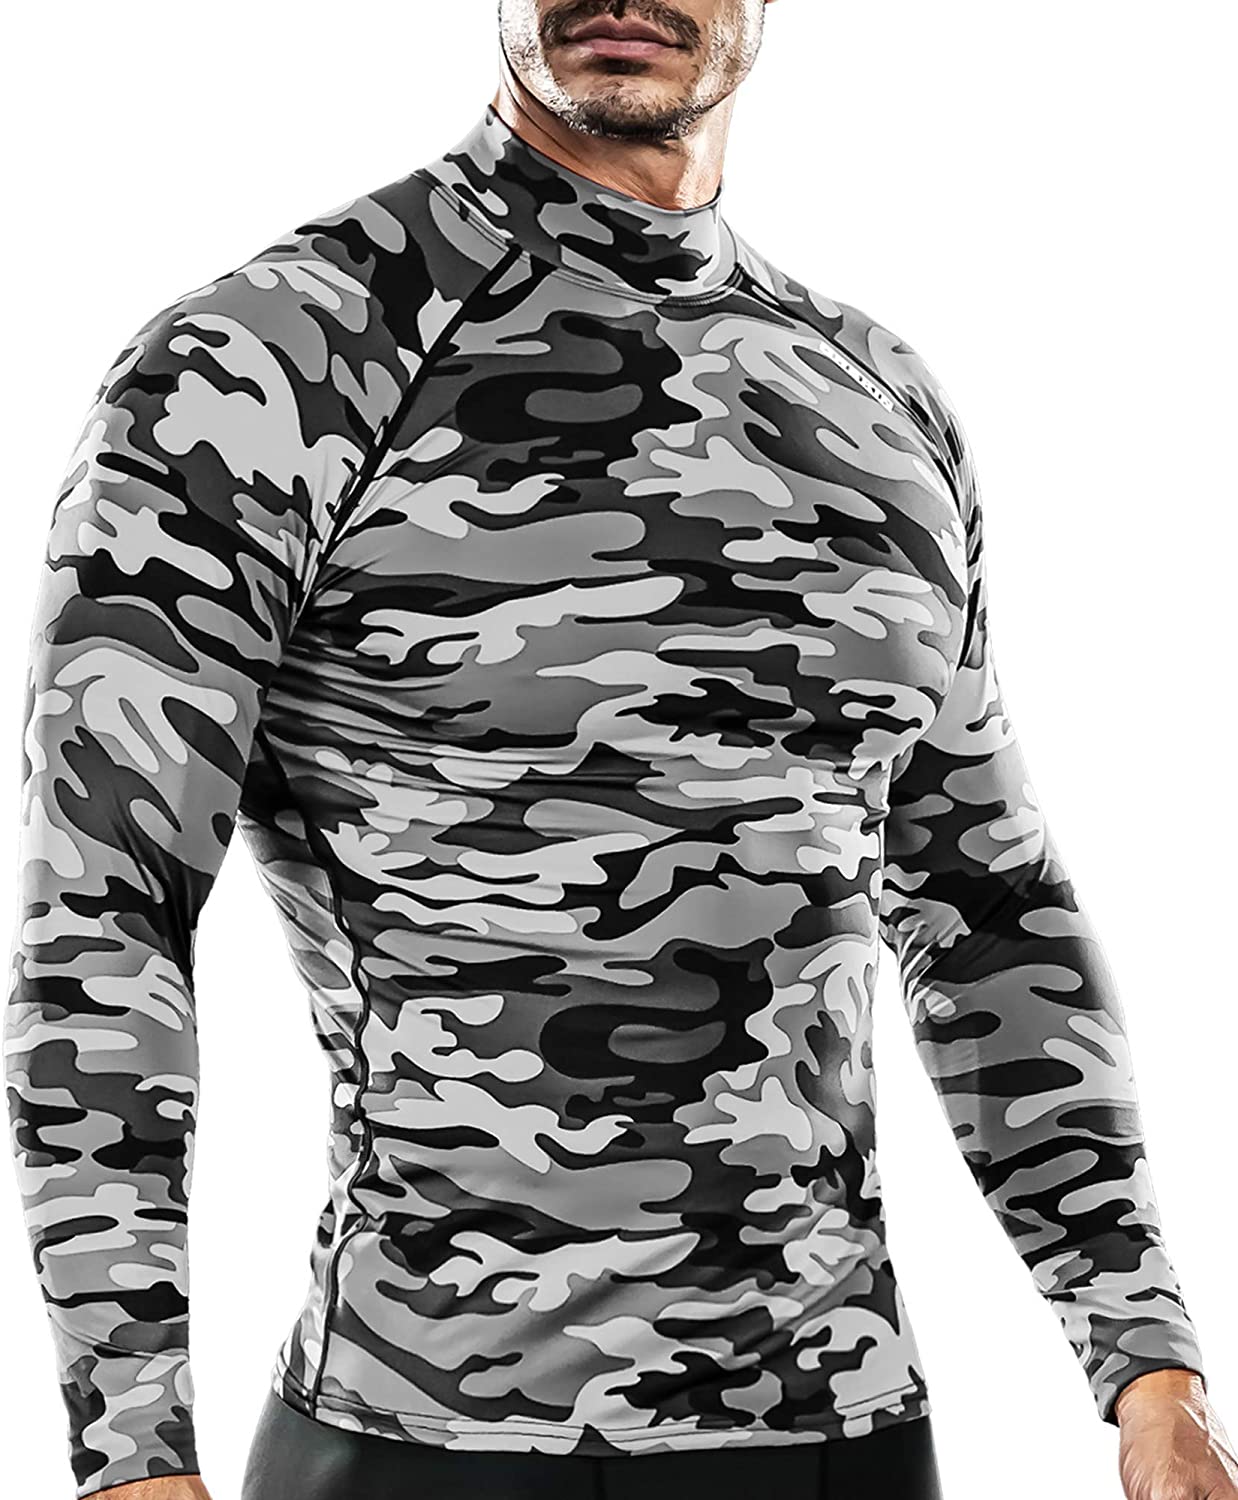 DRSKIN Men's Long Sleeve Compression Shirts Top Sports Workout Running Athletic